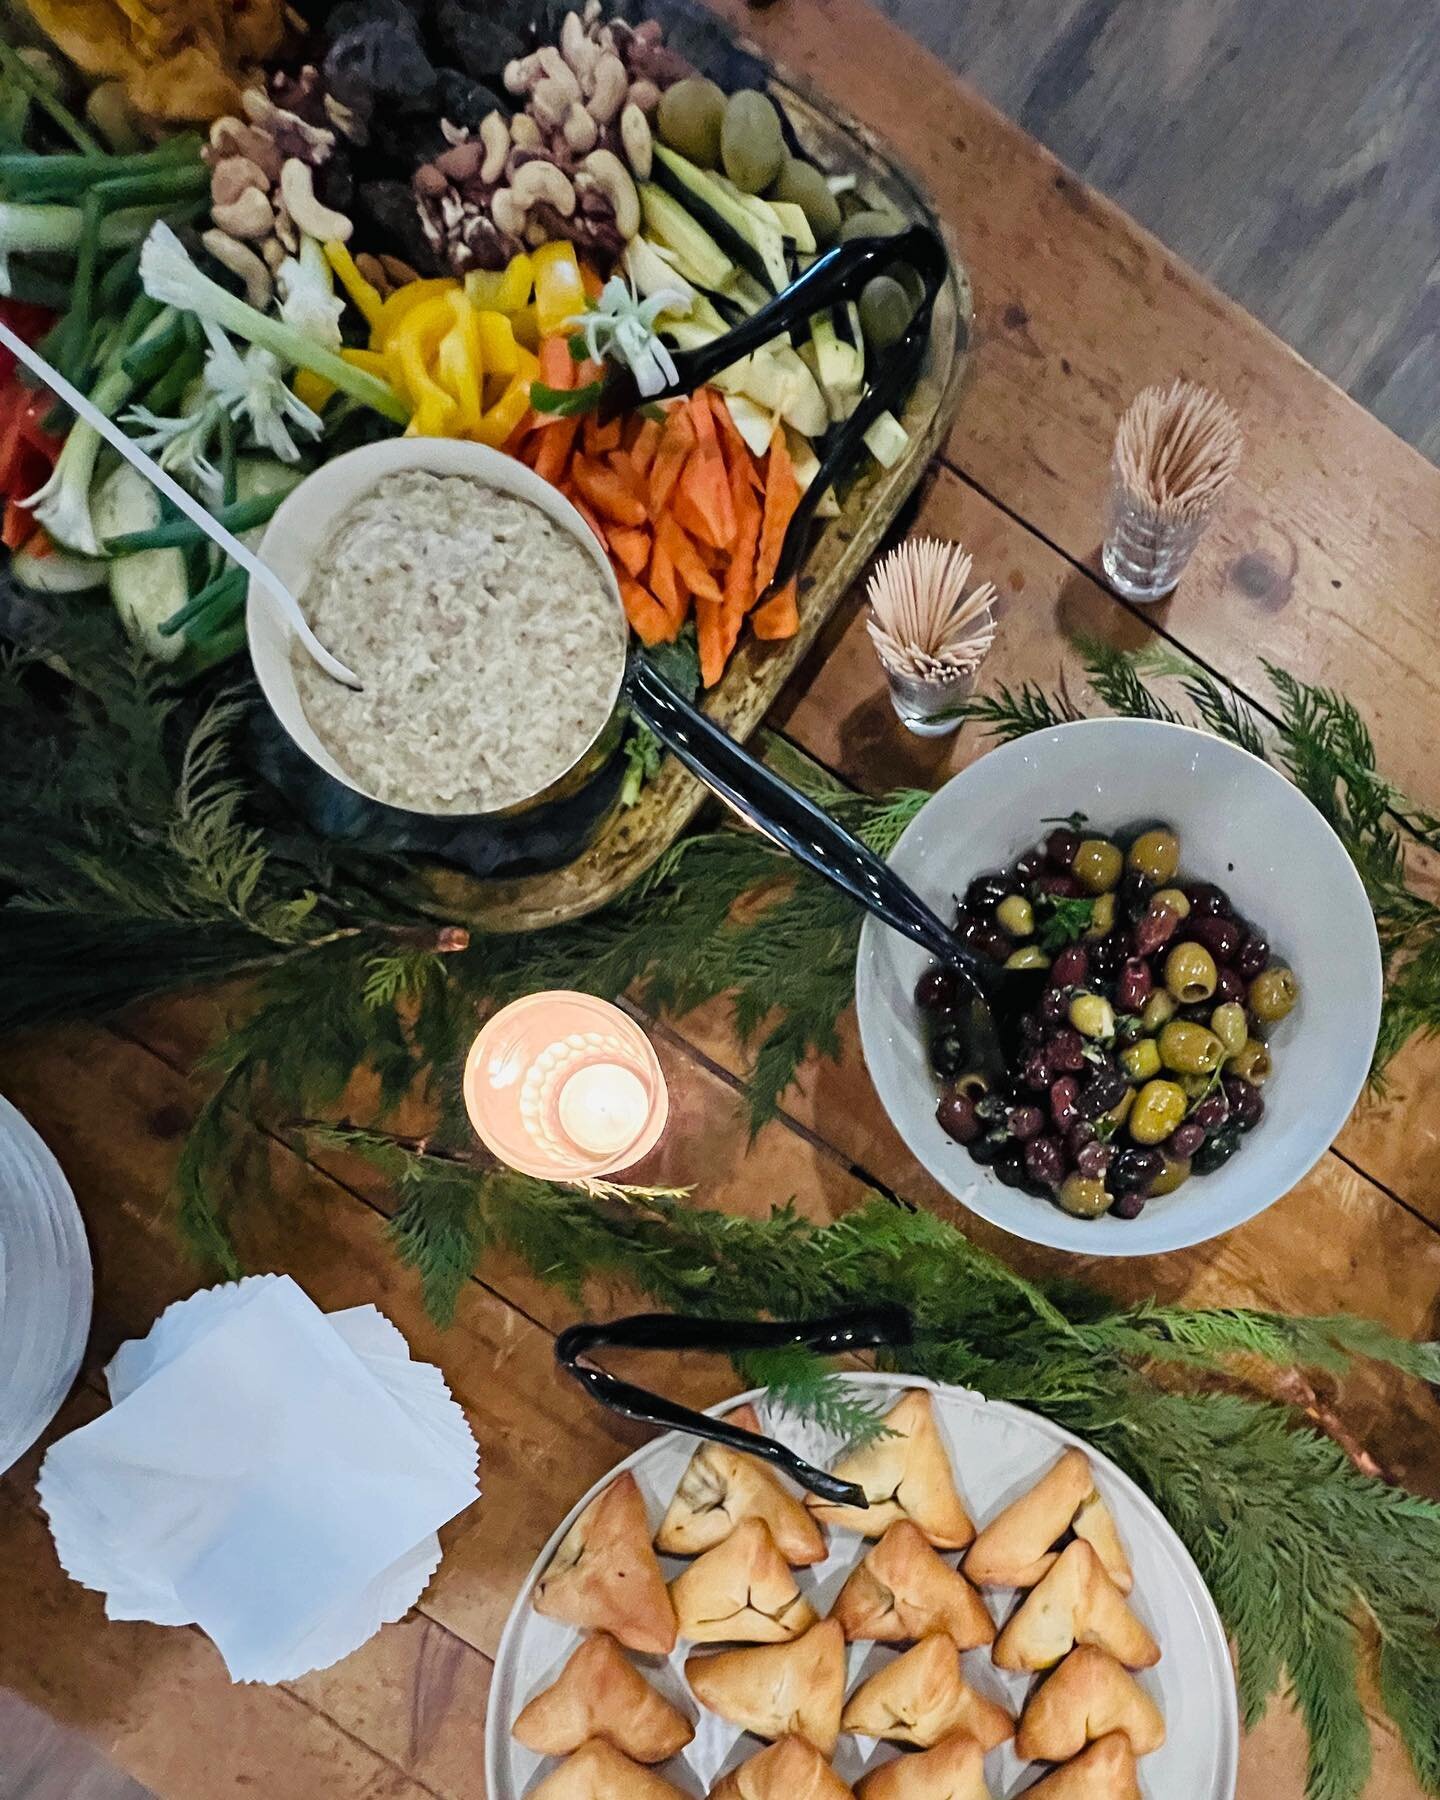 Thank you @hamrahs7spice, @kinderhookbottleshop, &amp; @samascottsgardenmarket for making our studio holiday party so special for all of us with the delicious savory Lebanese bites, gorgeous veggie and snacks spread, pomegranate ginger punch, &amp; o